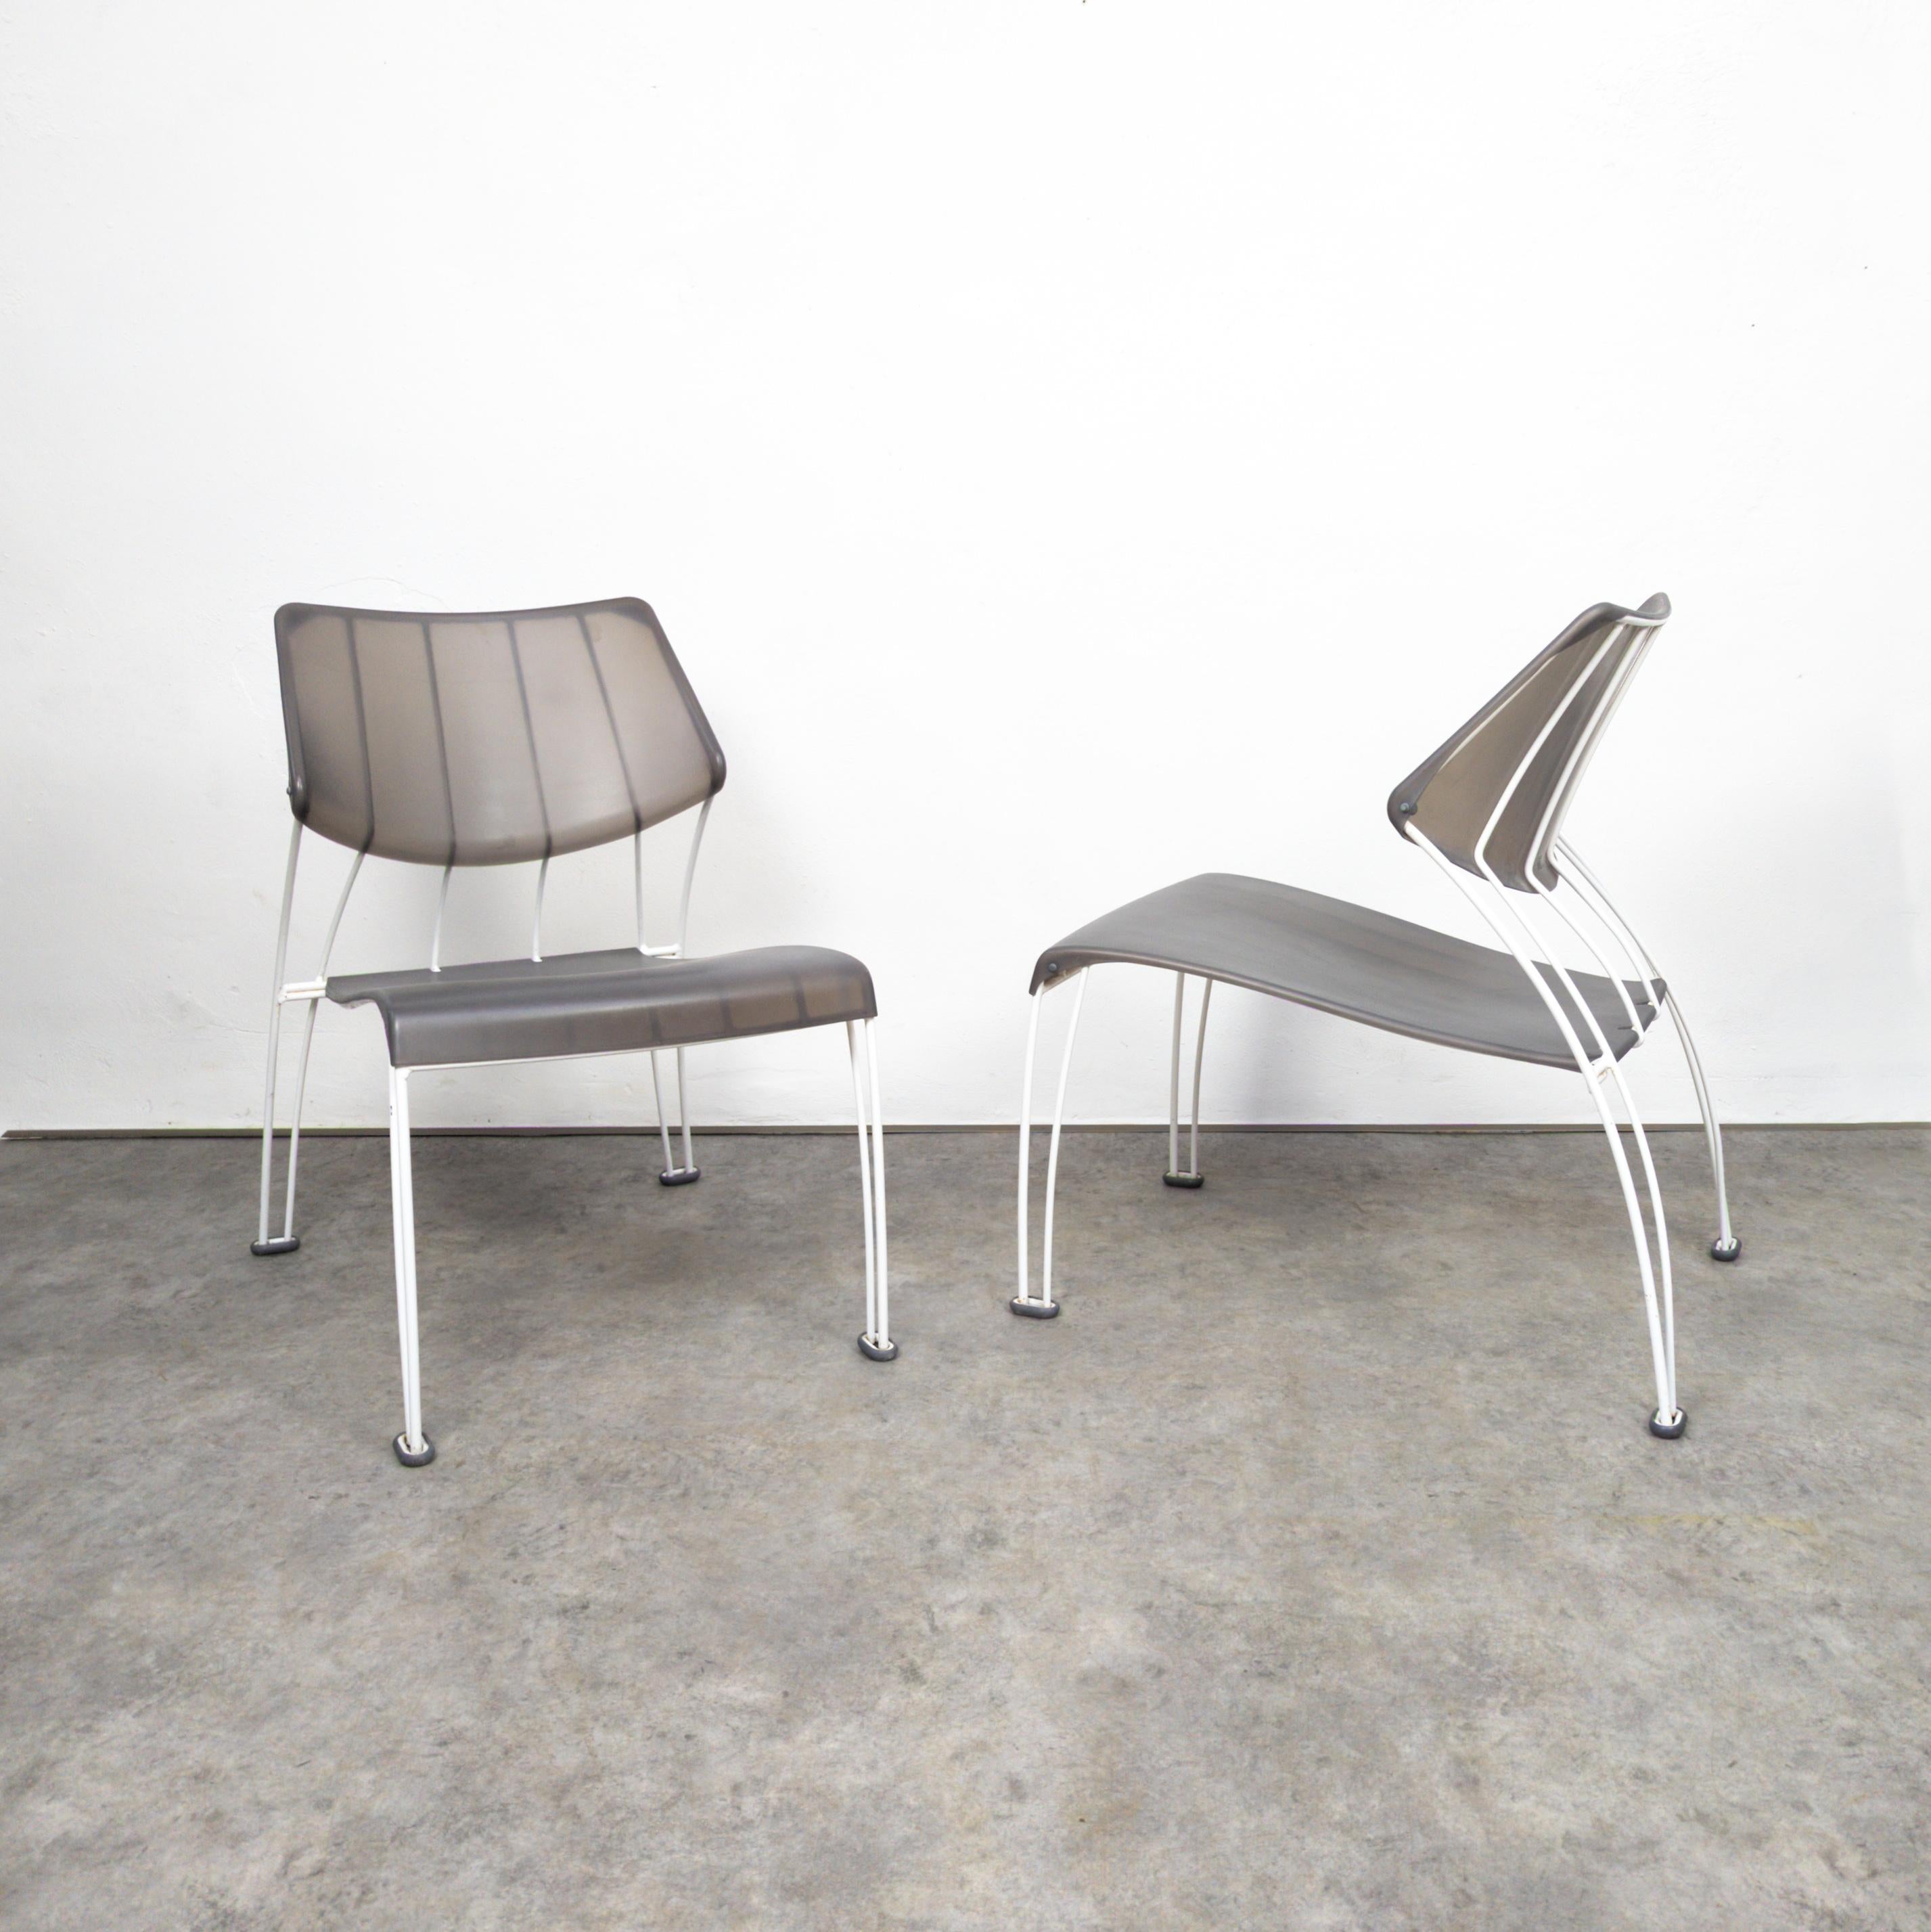 Pair of fantastic postmodern lounge chairs designed by Monika Mulder for Ikea in 1995. The Ikea PS Hässlö chairs designed by Monika Mulder are sleek and modern. They feature a minimalist design with clean lines, making them versatile for various